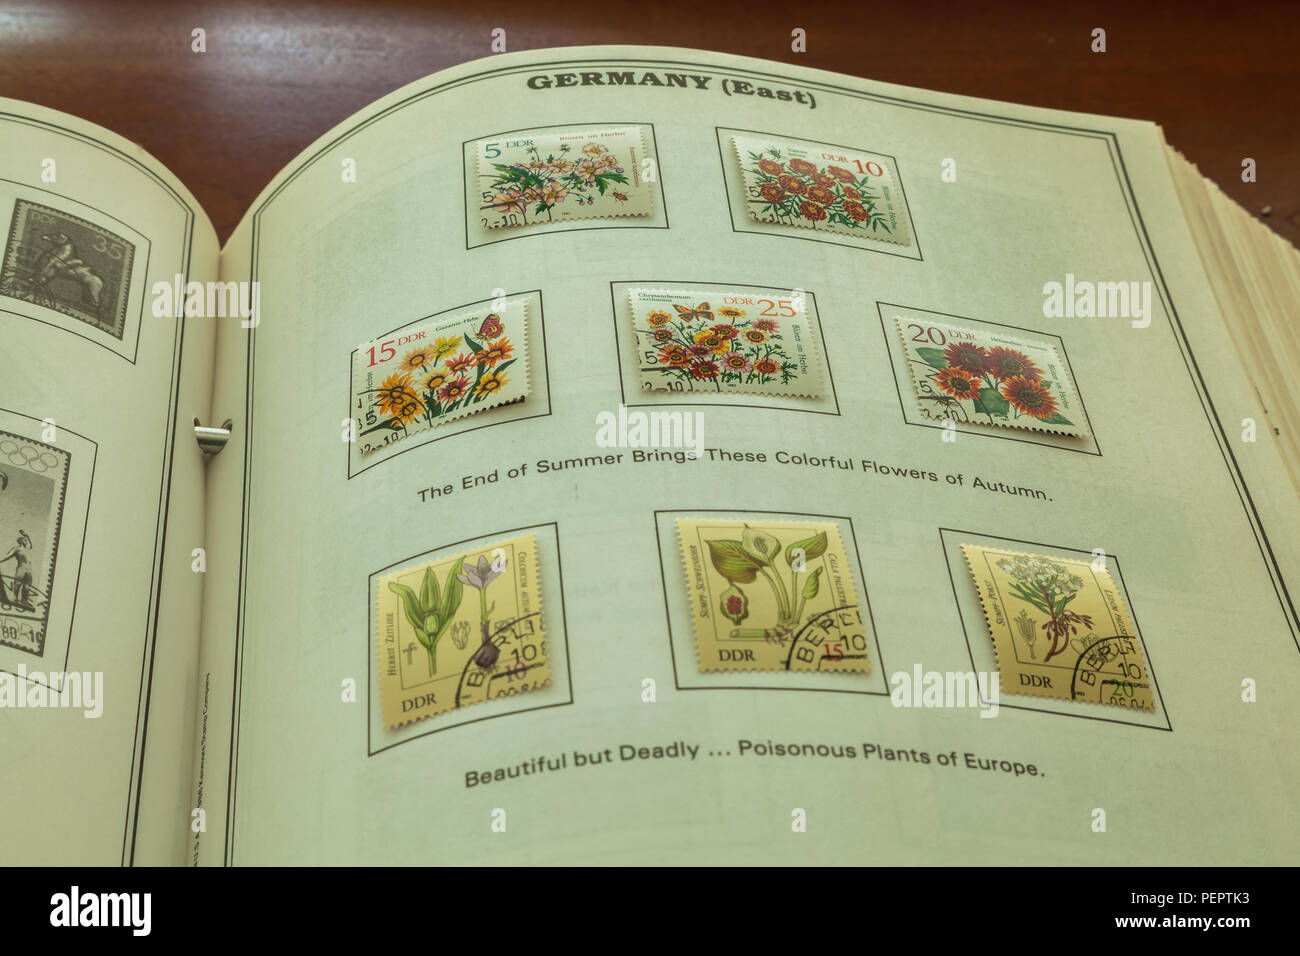 Stamps collection album with one page contains couple sets of used stamps from East Germany depicting autumn flowers and poisonous plants of Europe. Stock Photo